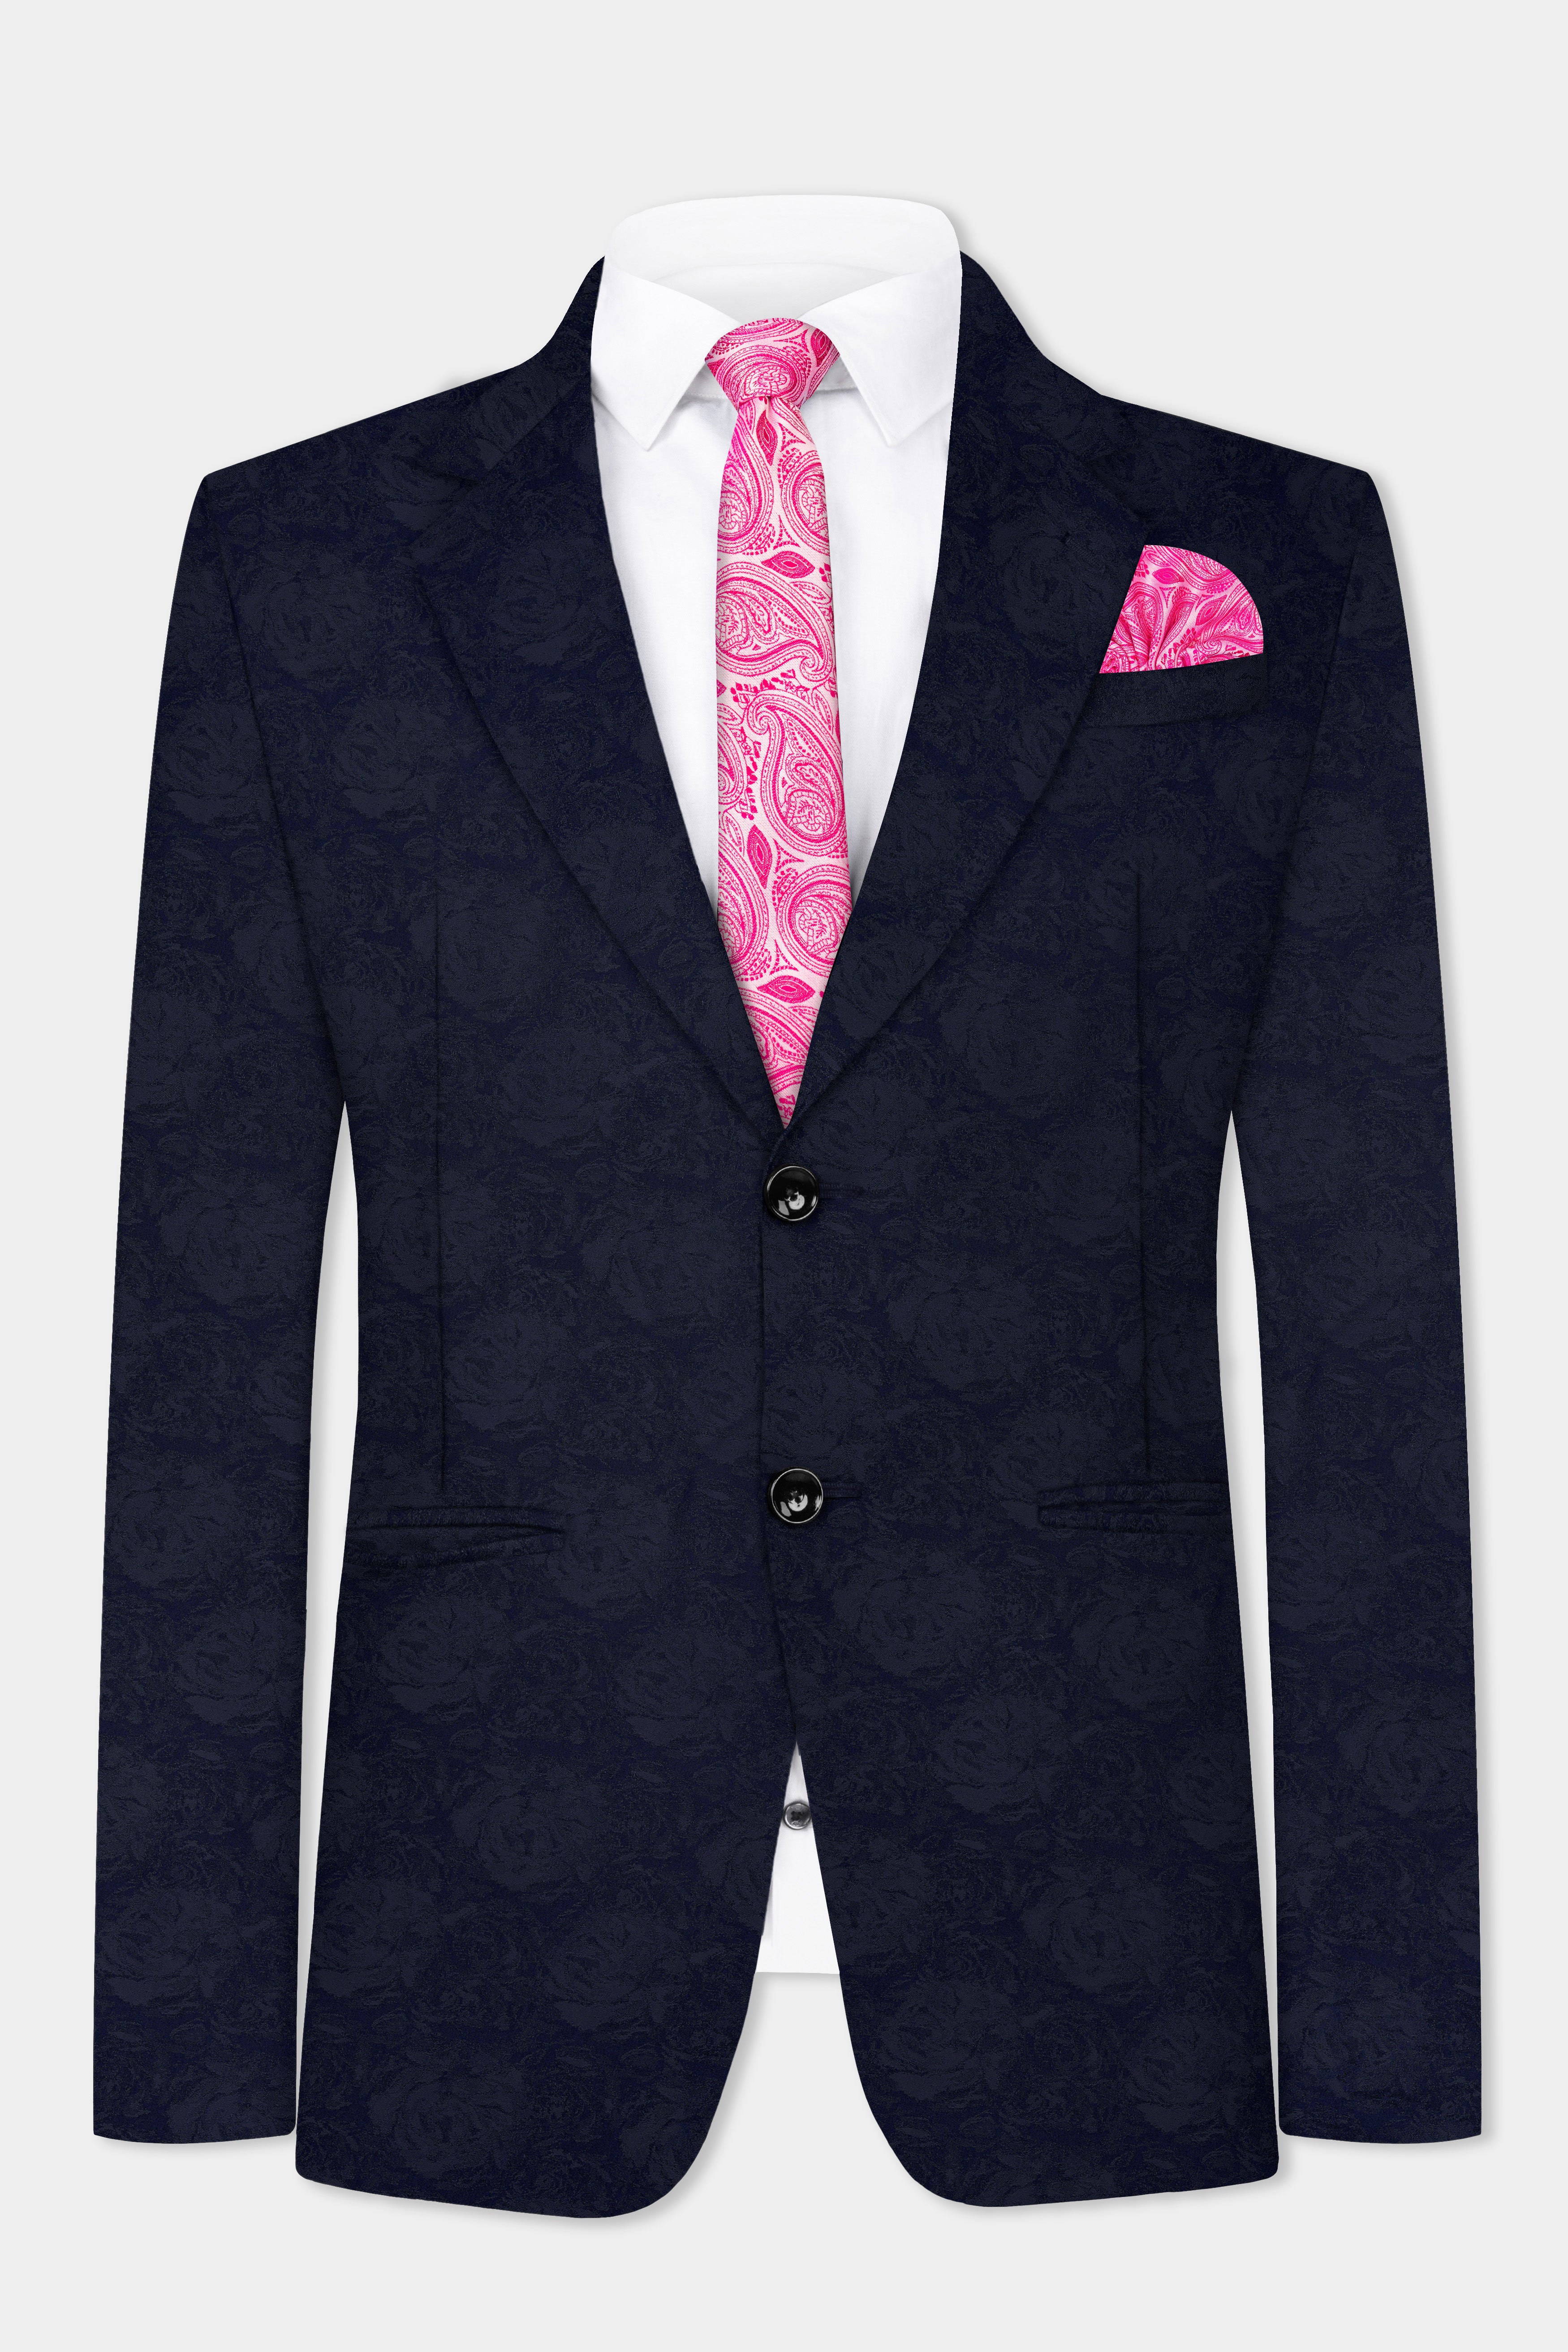 Firefly Blue Jacquard Textured Single Breasted Suit